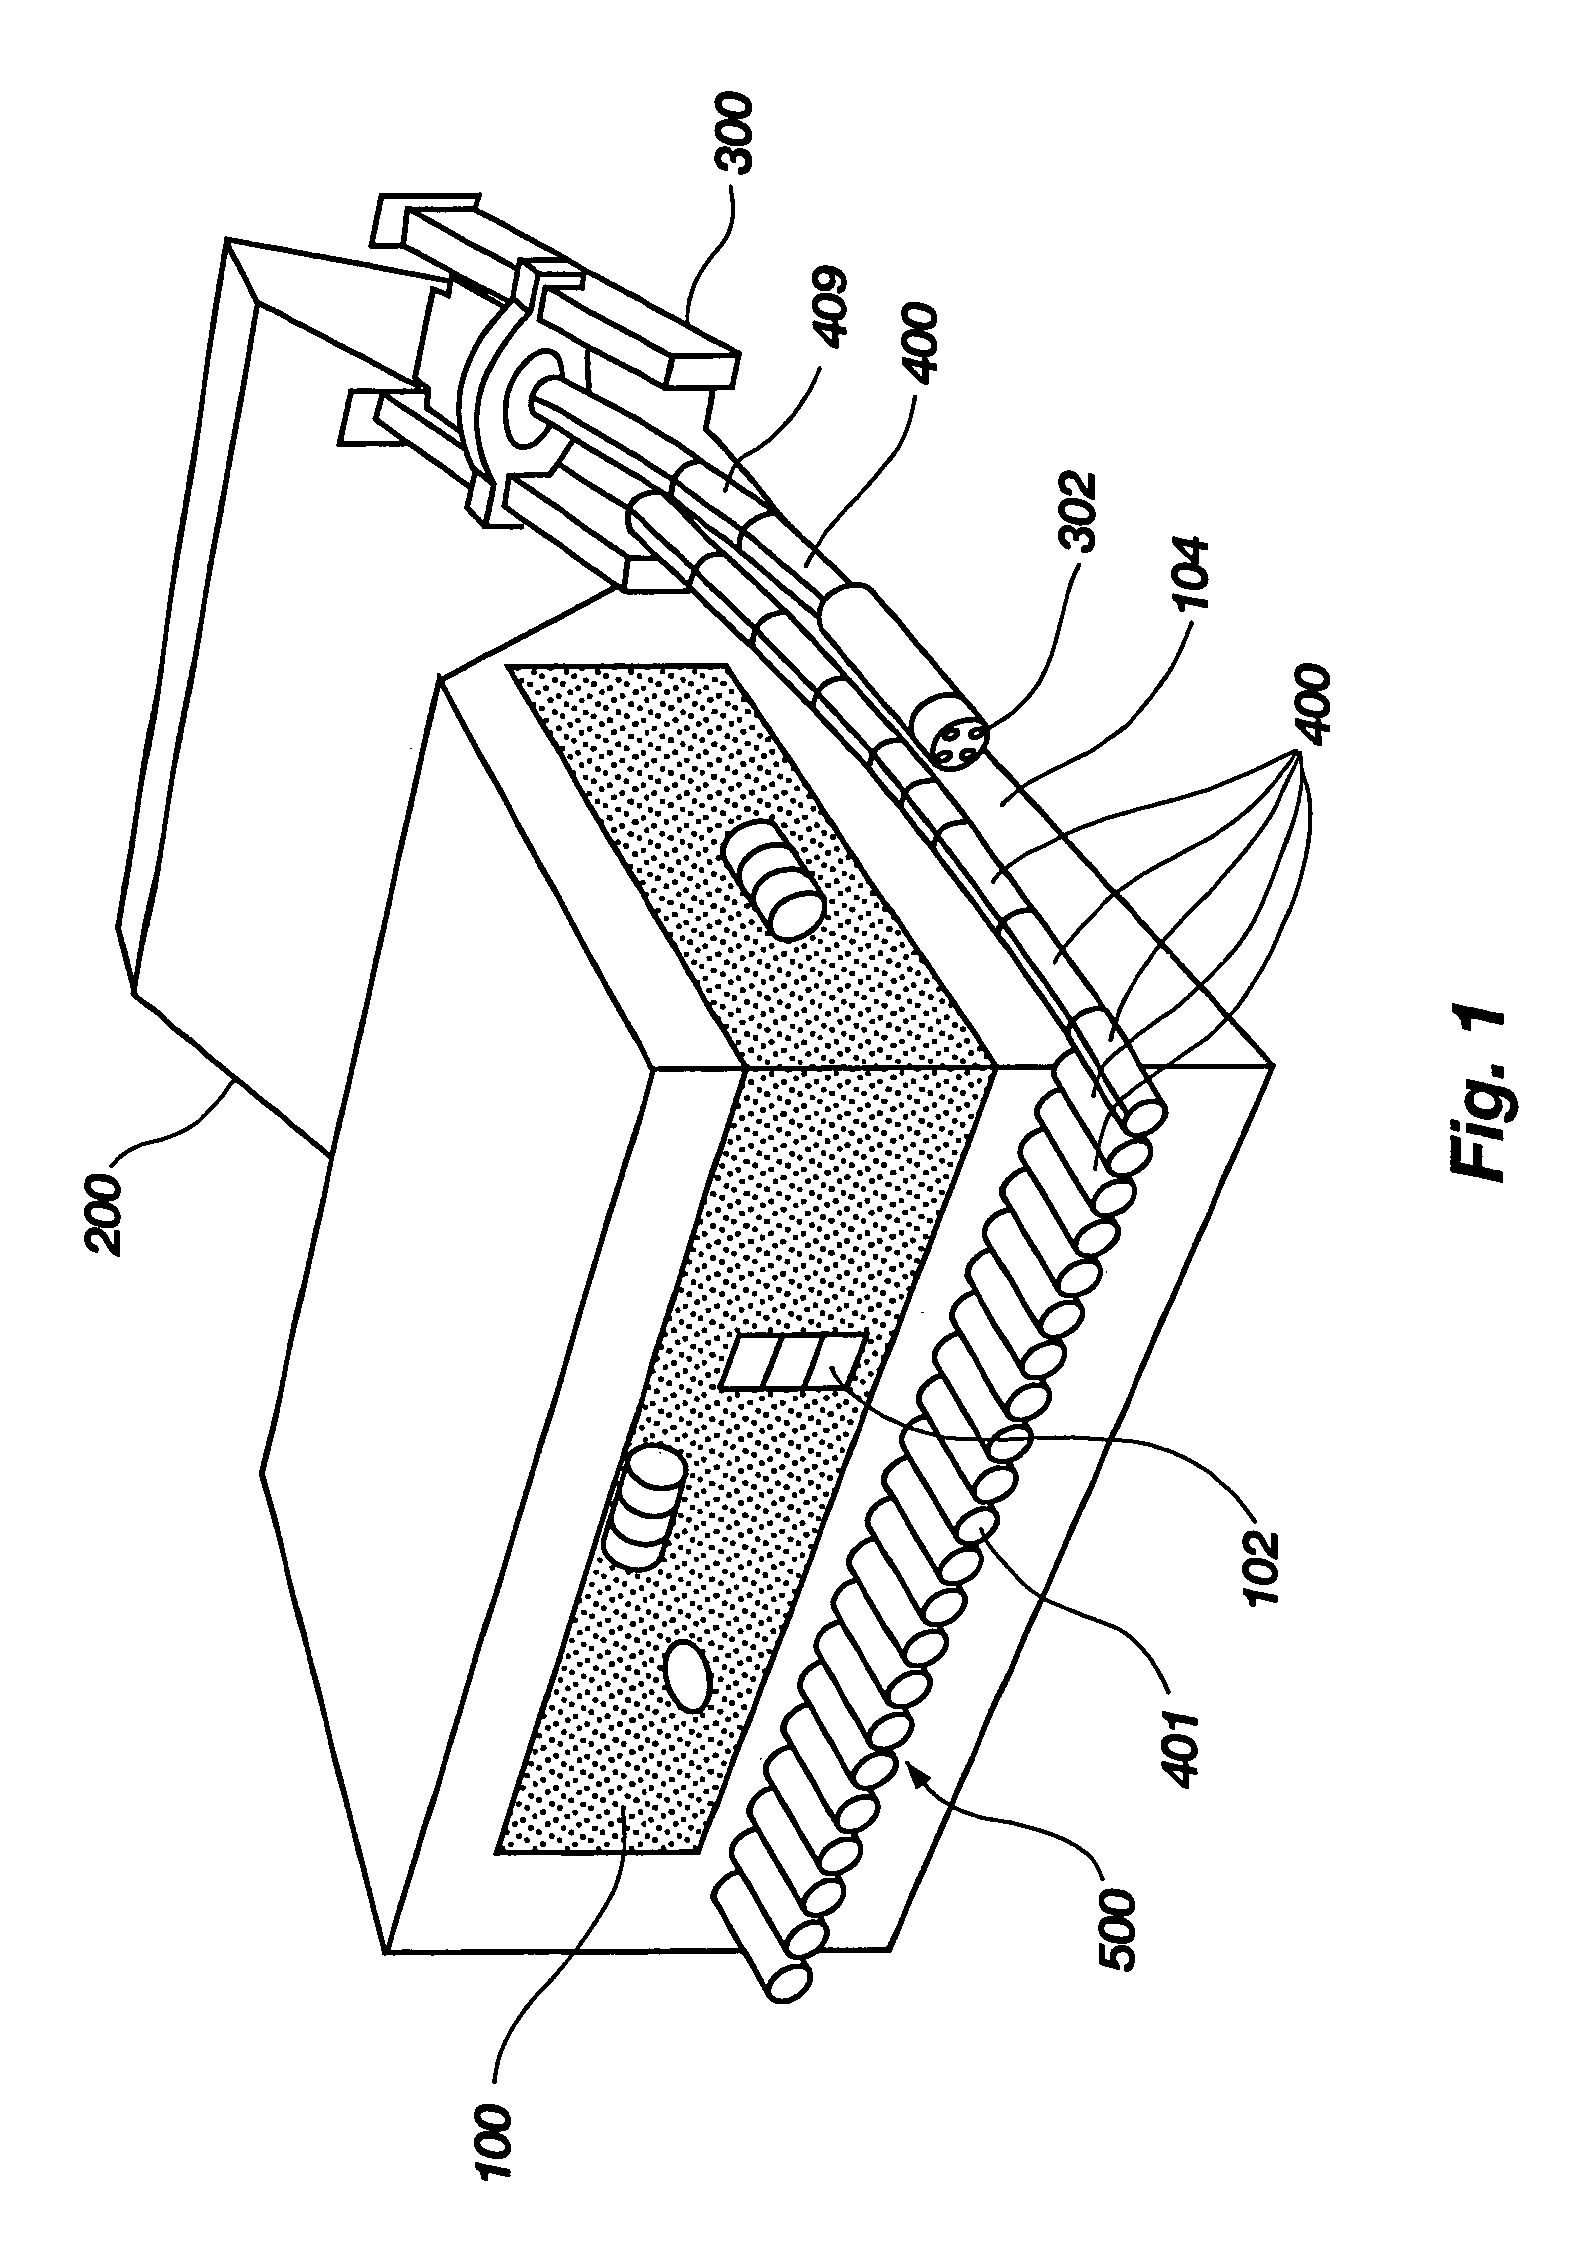 Method of in situ retrieval of contaminants or other substances using a barrier system and leaching solutions